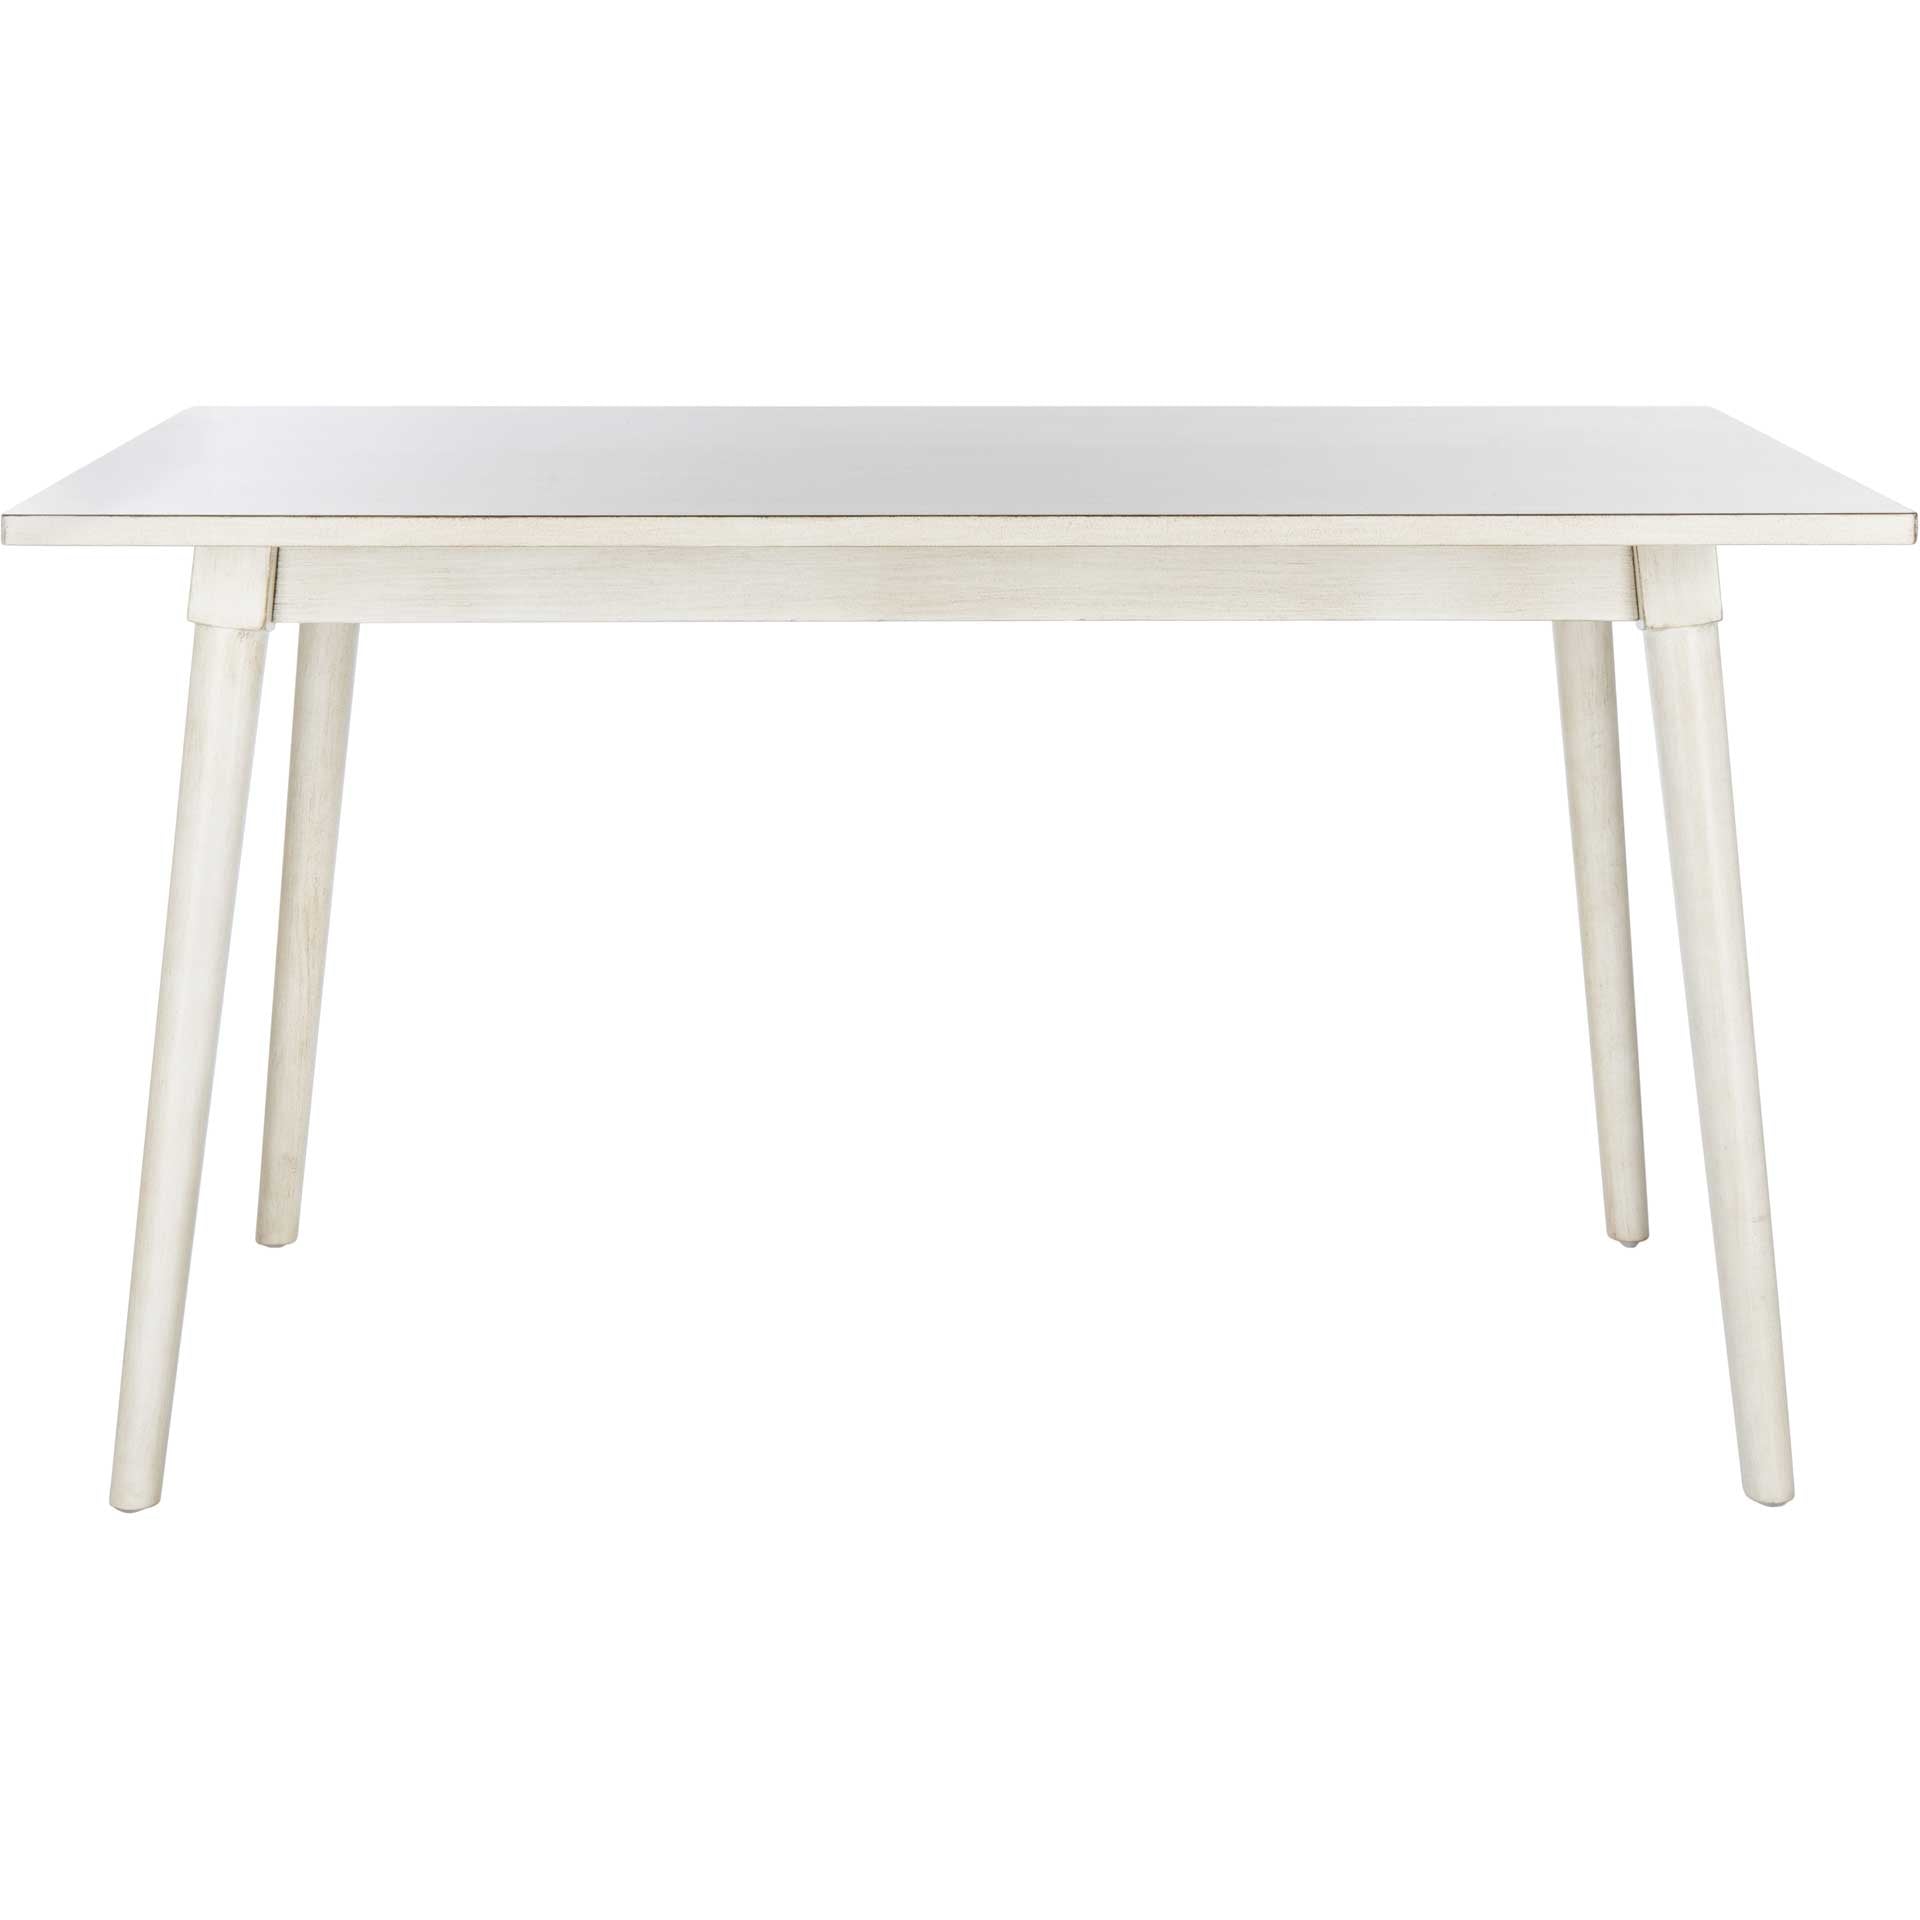 Tiana Rectangle Dining Table Antique/White